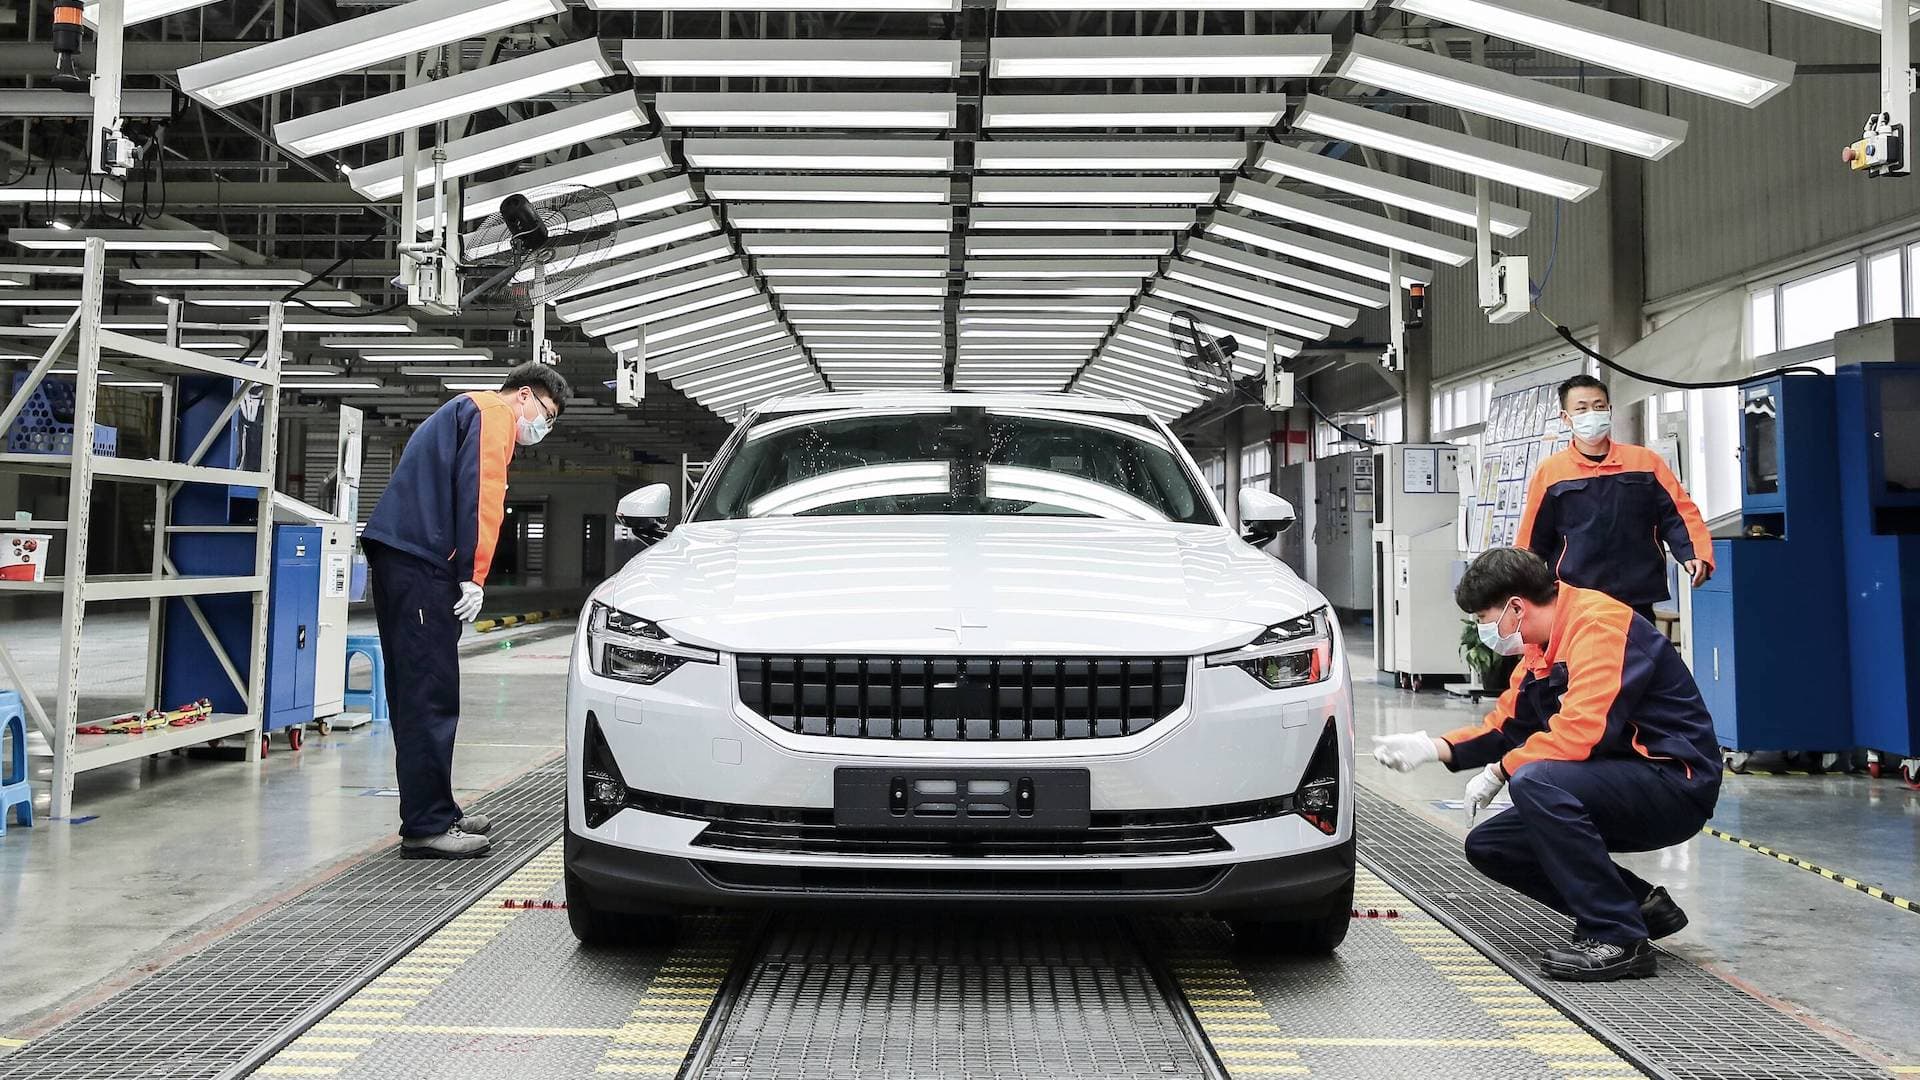 The 408-HP All-Electric Polestar 2 Starts Production in China at Probably the Worst Possible Time